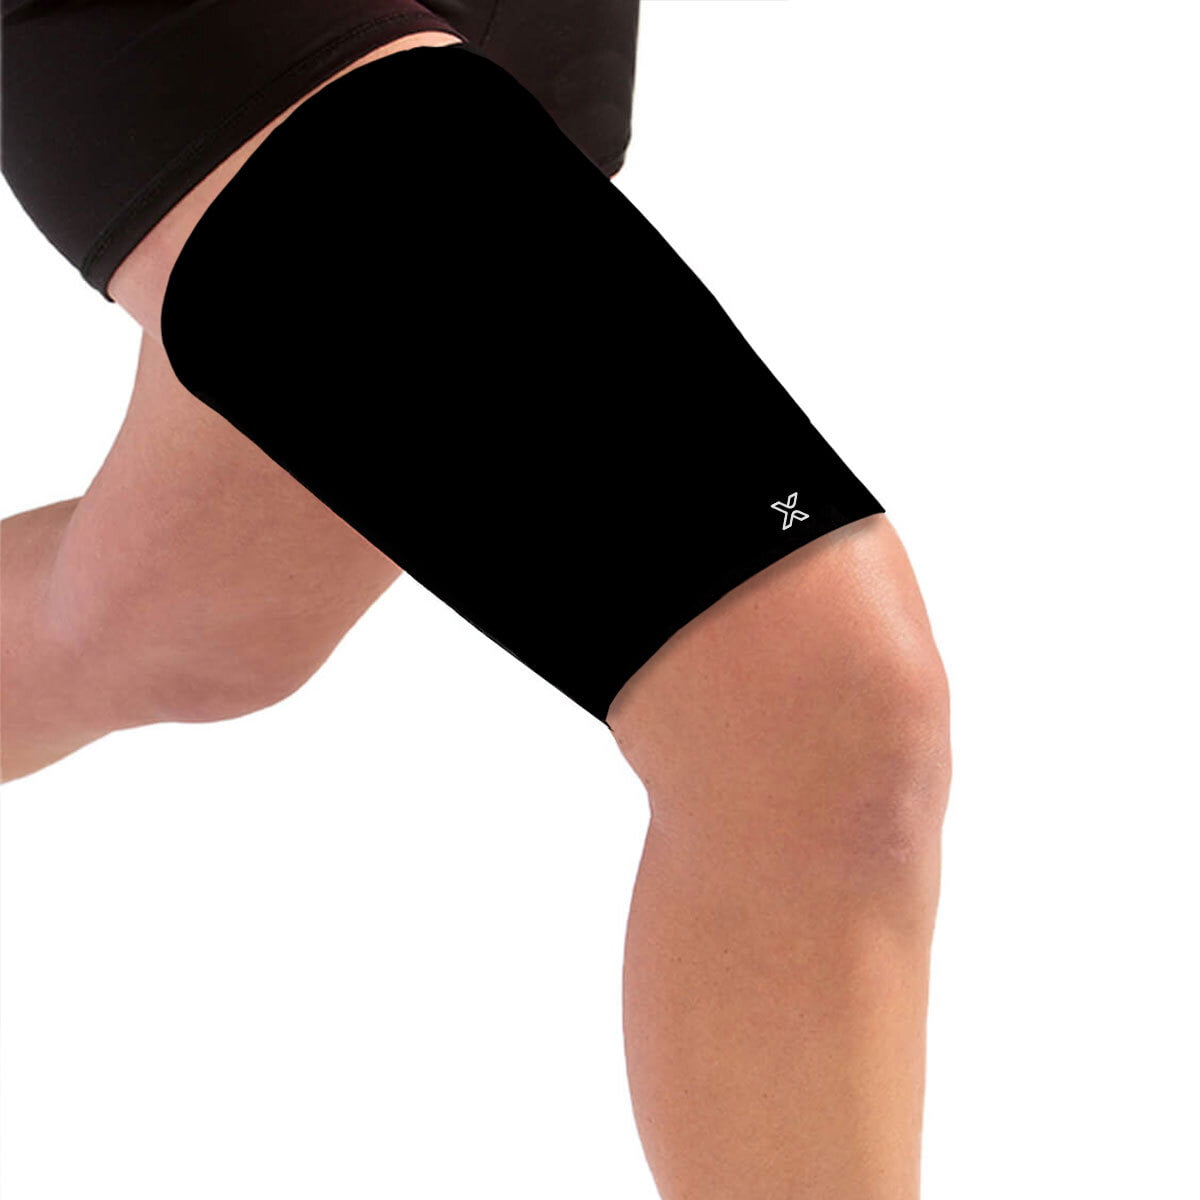 Haofy Thigh Compression Sleeve,Thigh Support Sleeve,Thigh